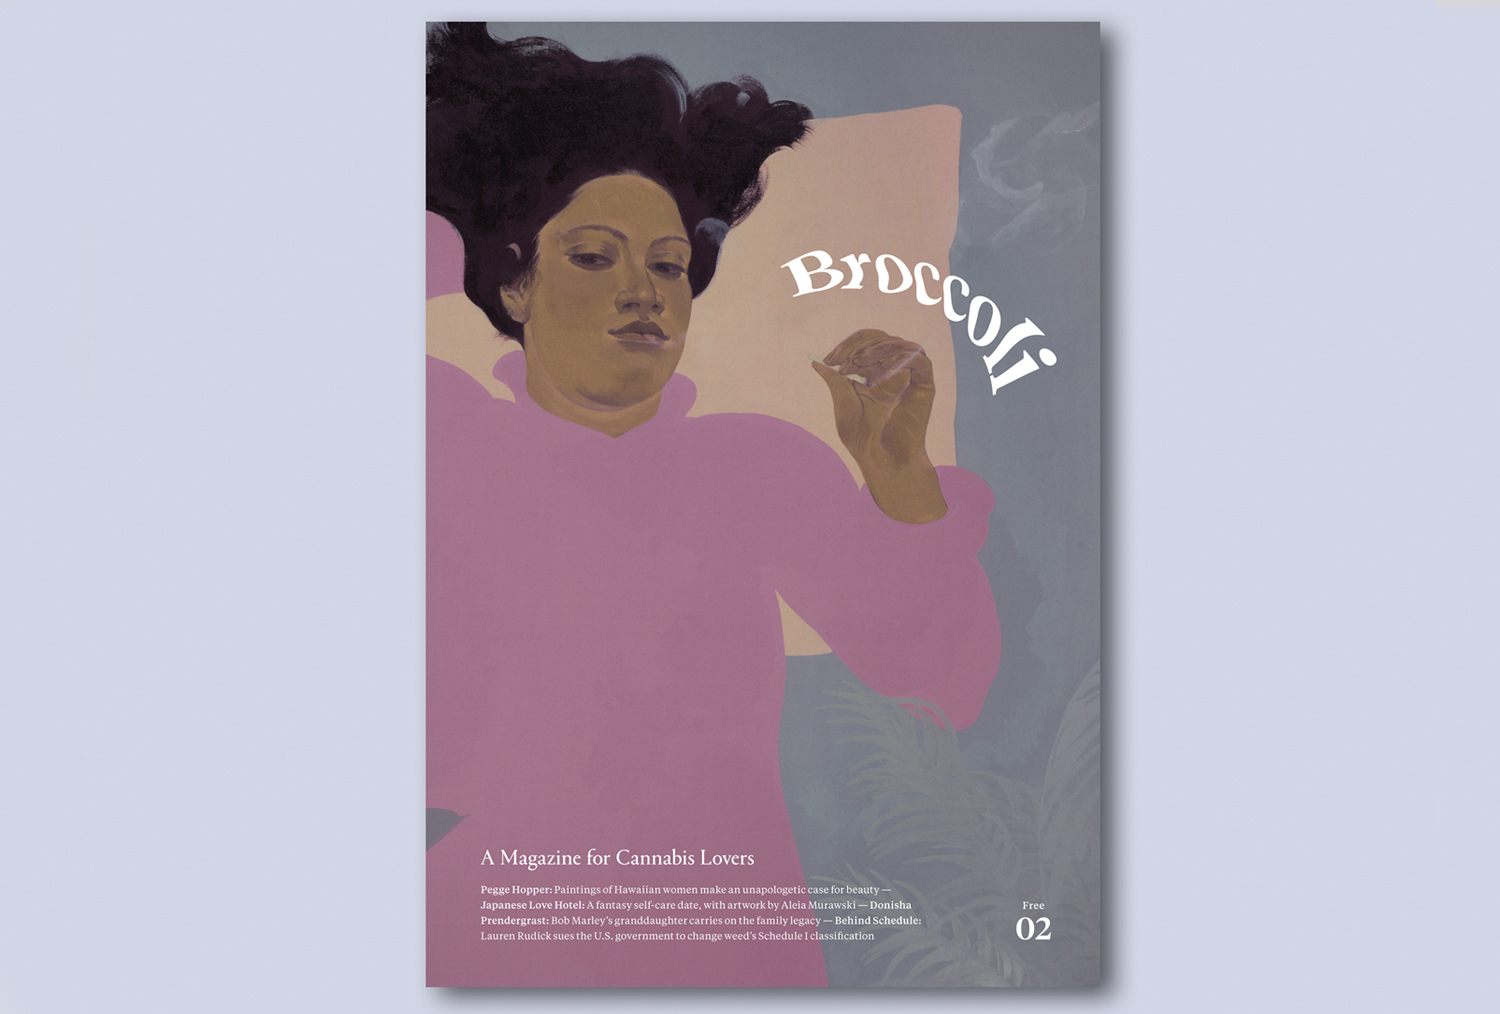 Broccoli Issue 2, Cover Art by Pegge Hopper